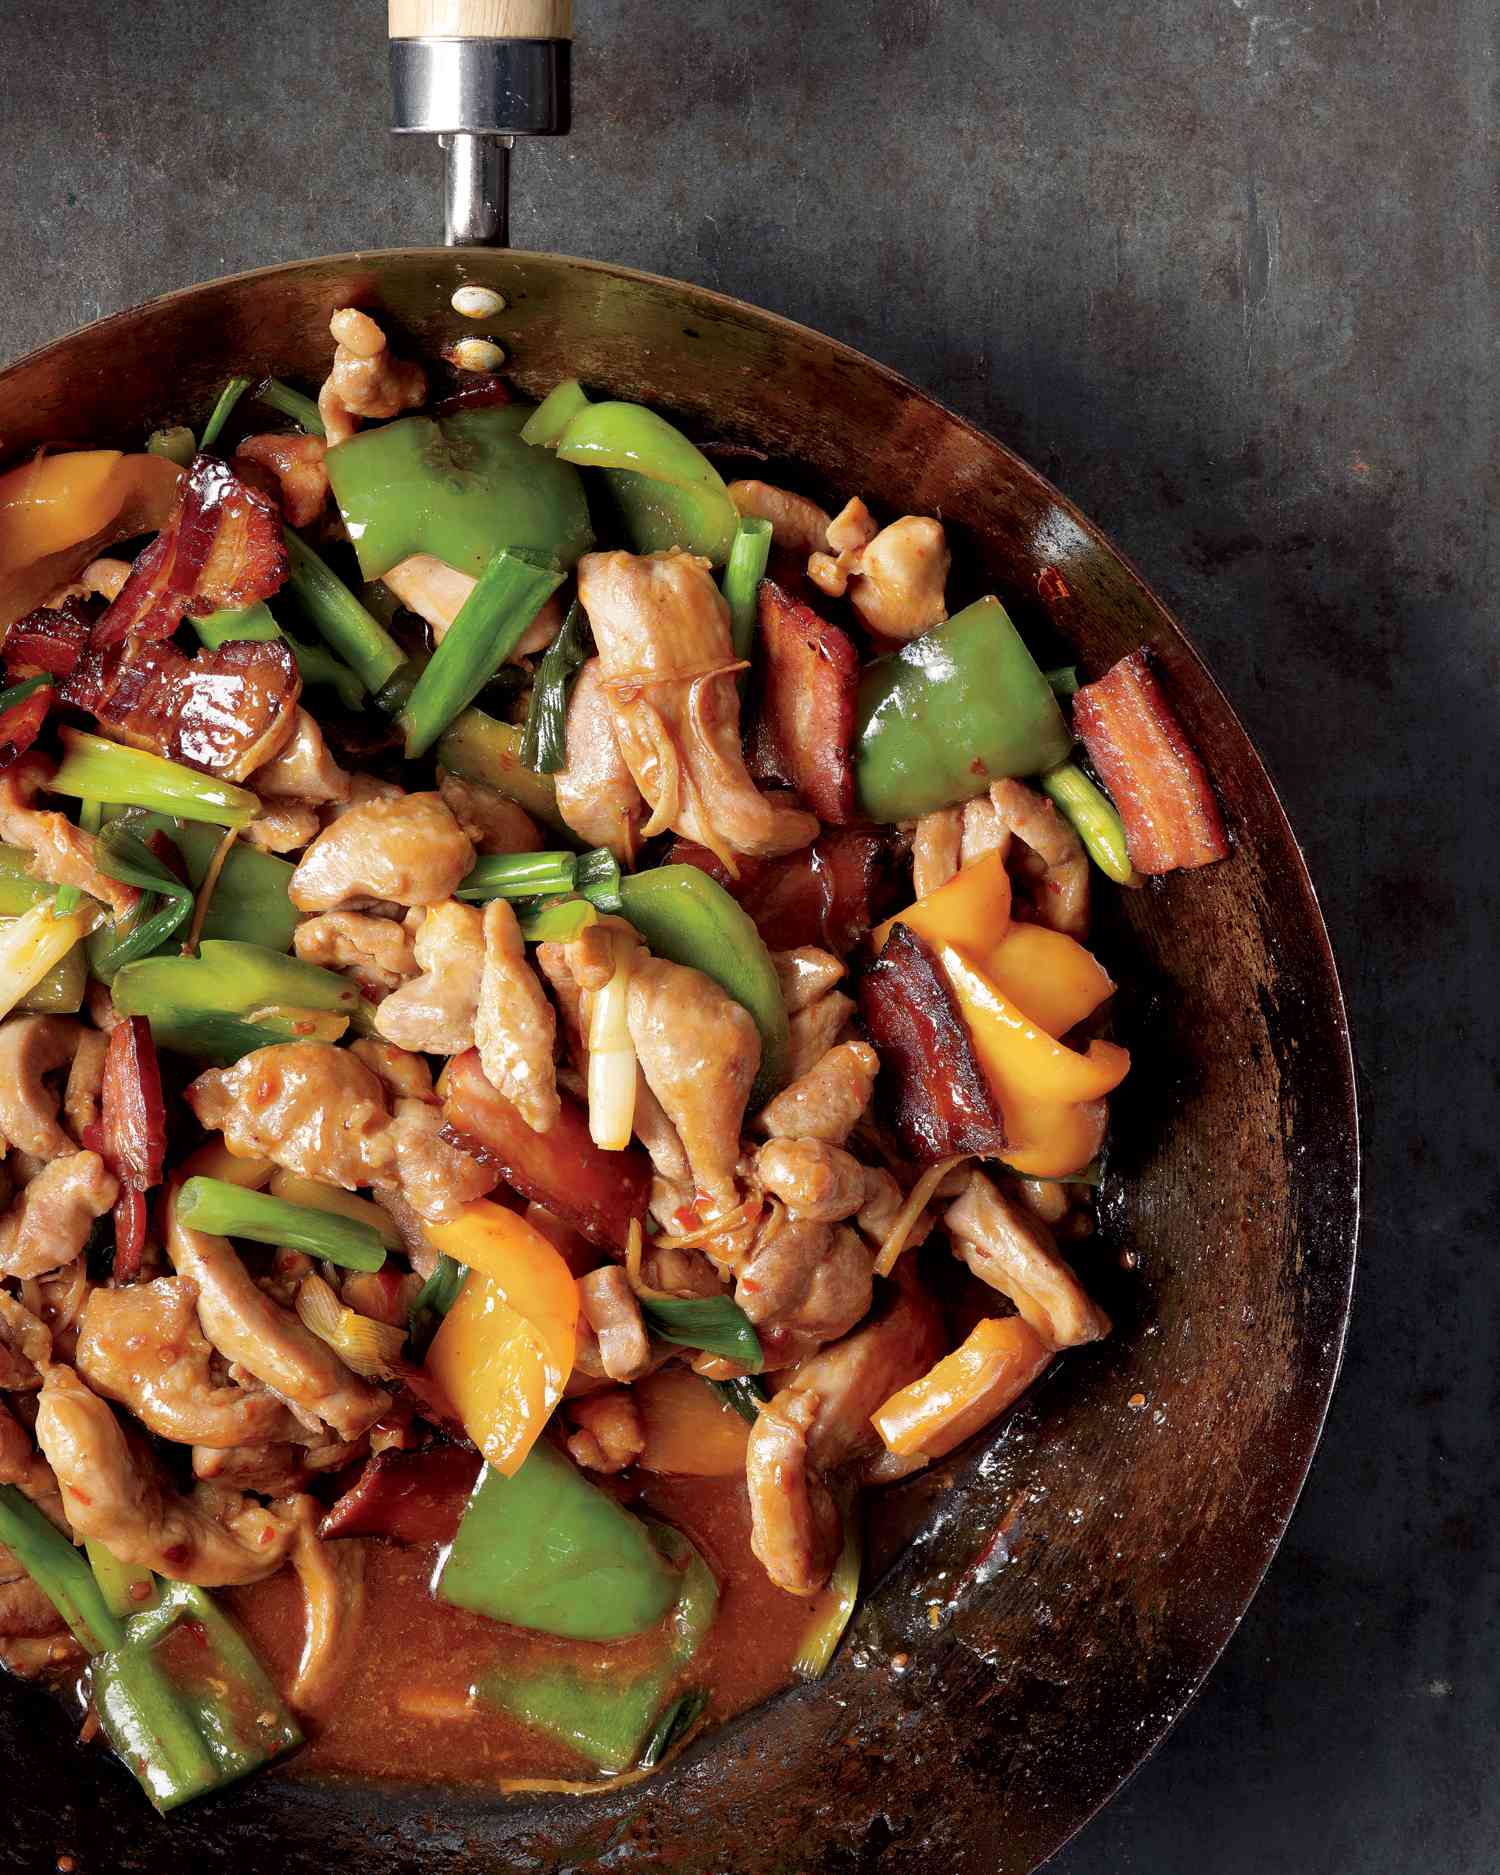 Spicy Turkey Thighs and Bacon Stir-Fry